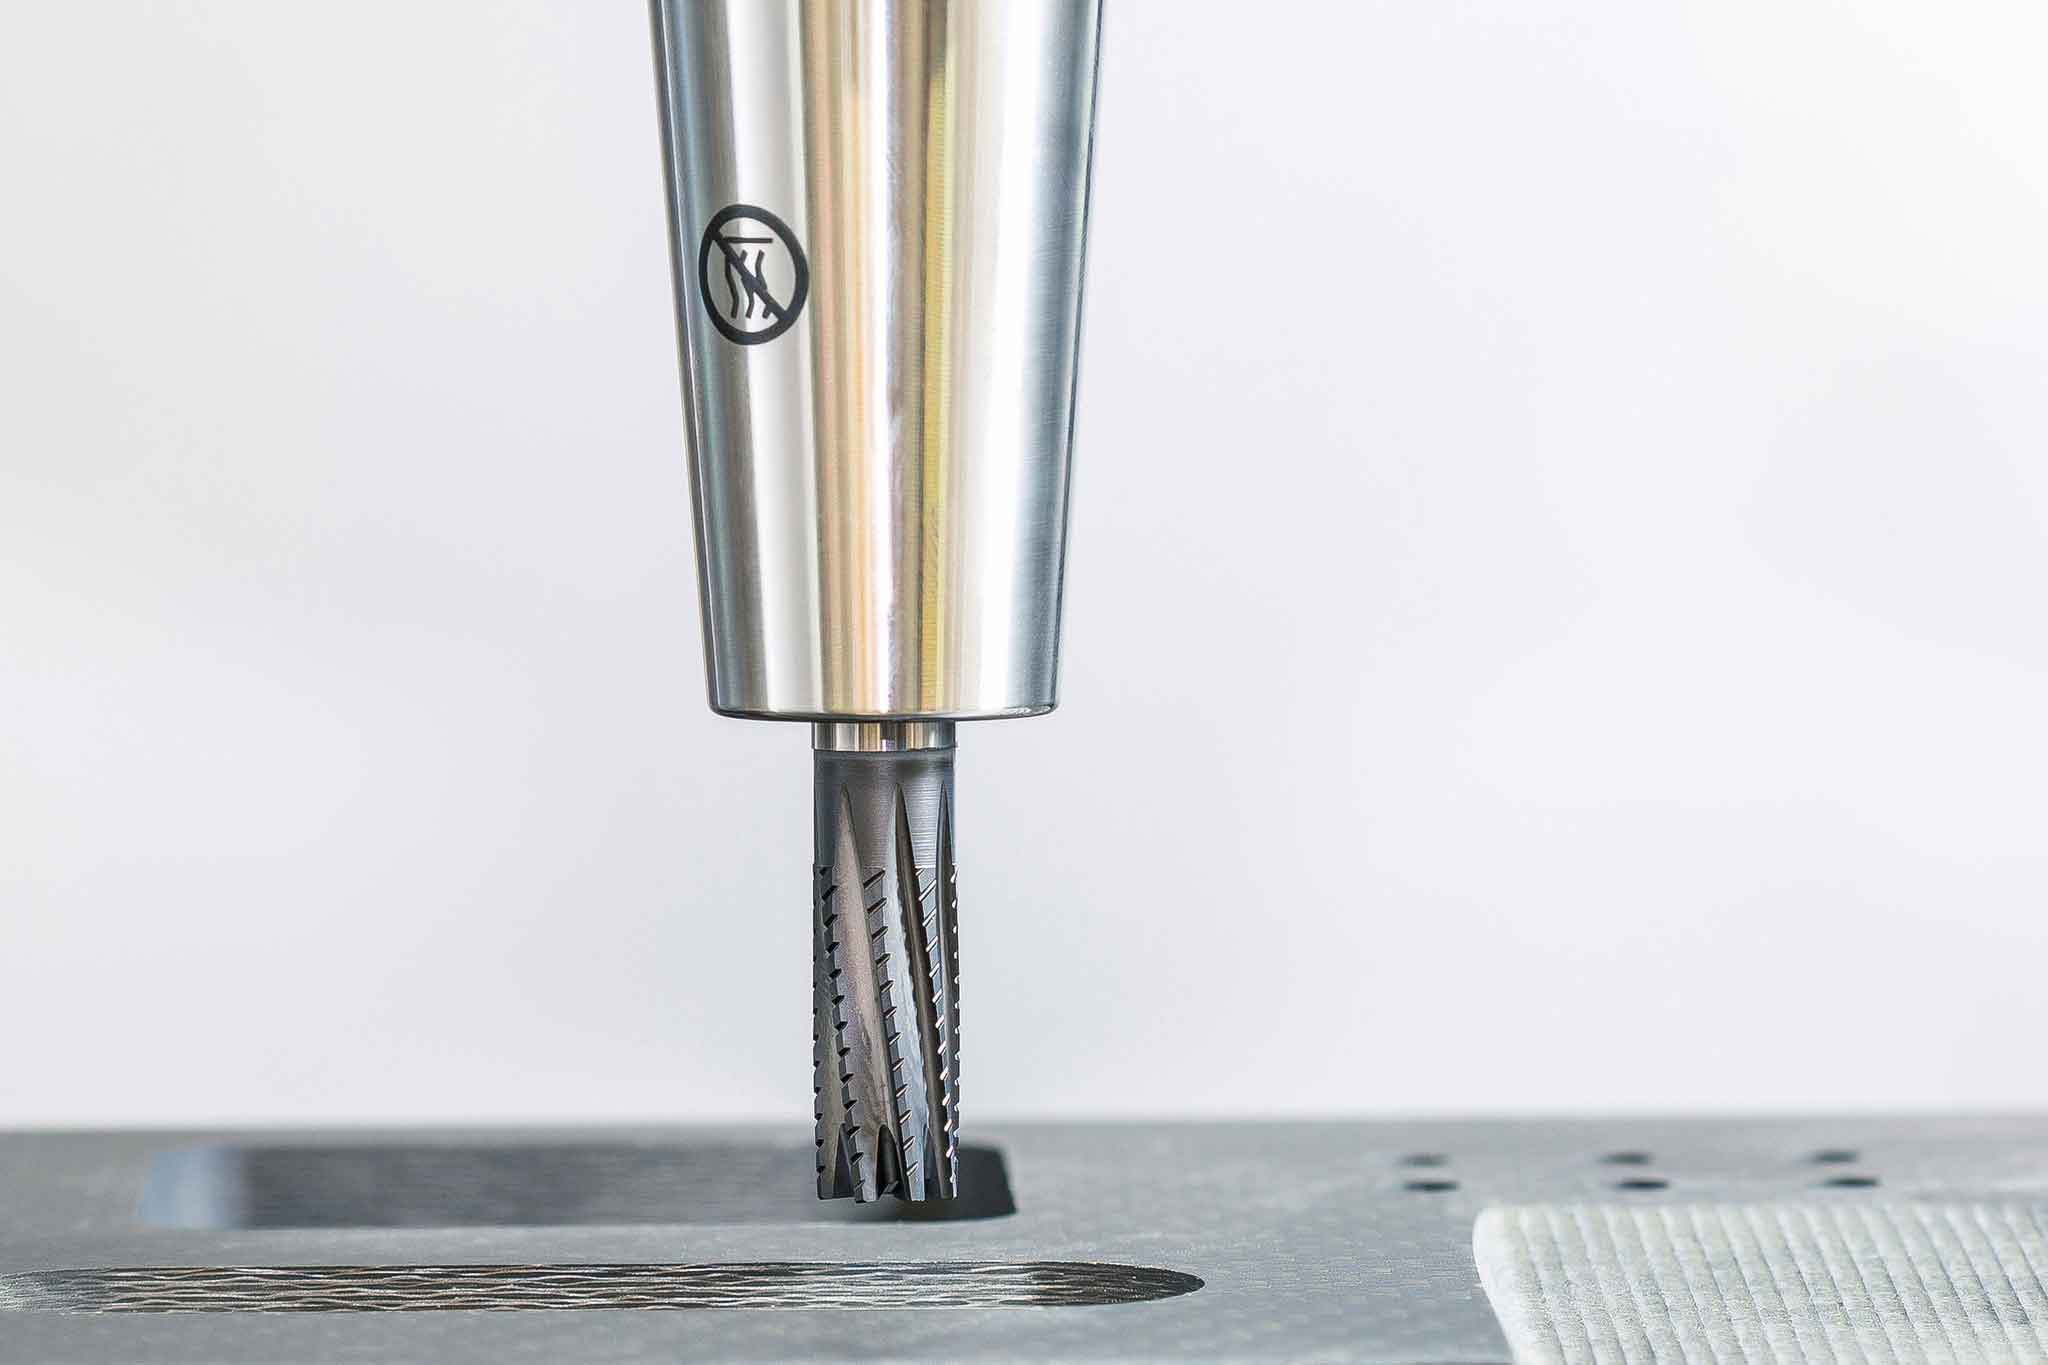 The OptiMill-Composite-Speed-Plus solid carbide milling cutter can be seen during the machining of a CFRP material.